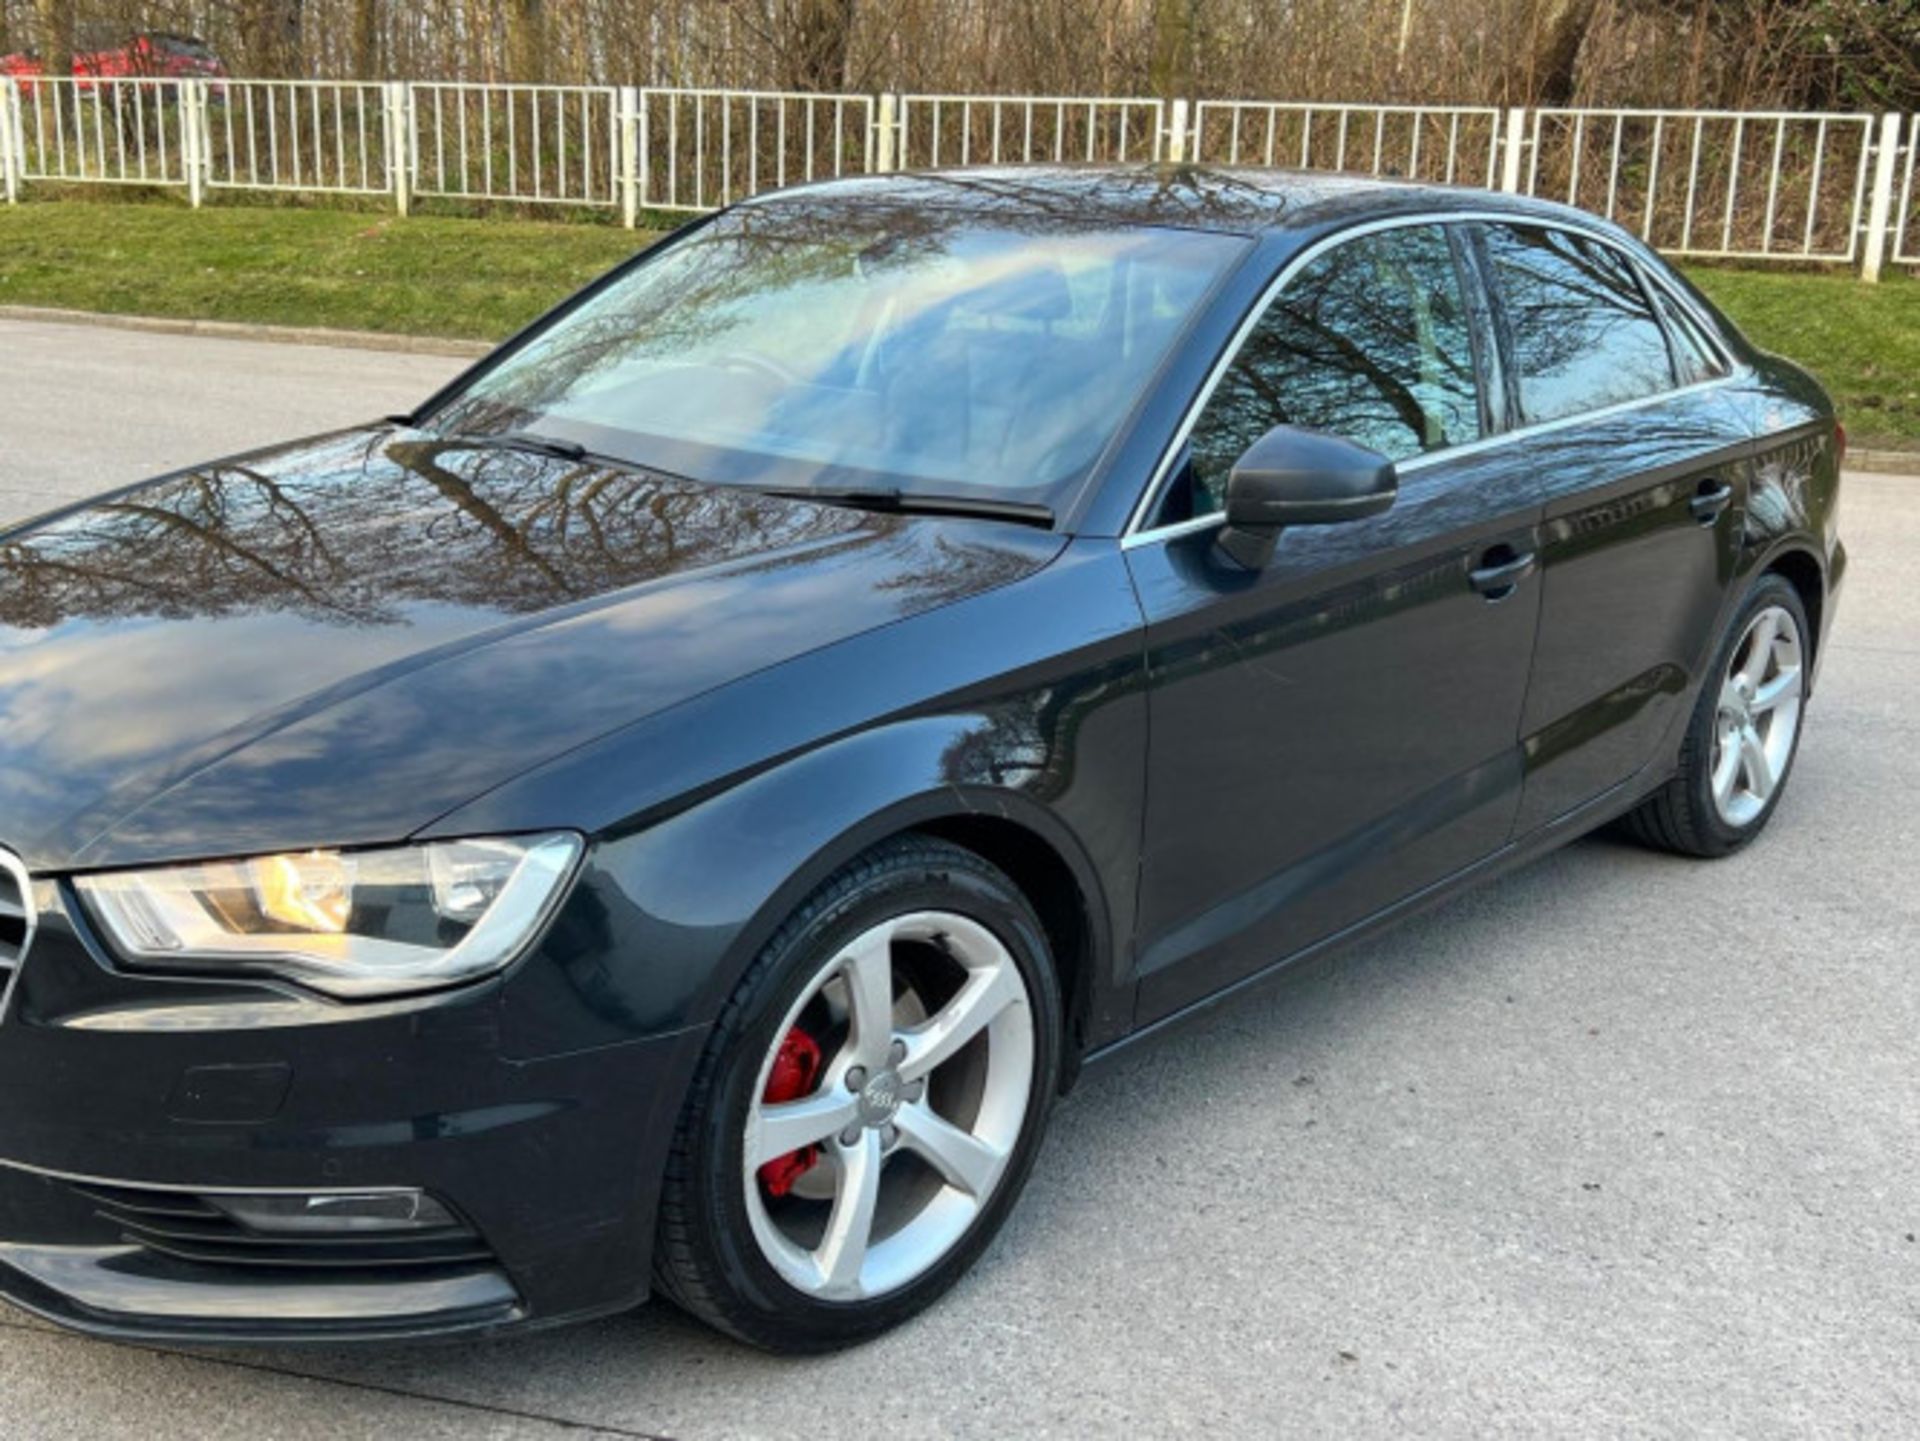 AUDI A3 2.0TDI SPORTBACK - STYLE, PERFORMANCE, AND COMFORT COMBINED >>--NO VAT ON HAMMER--<< - Image 187 of 216